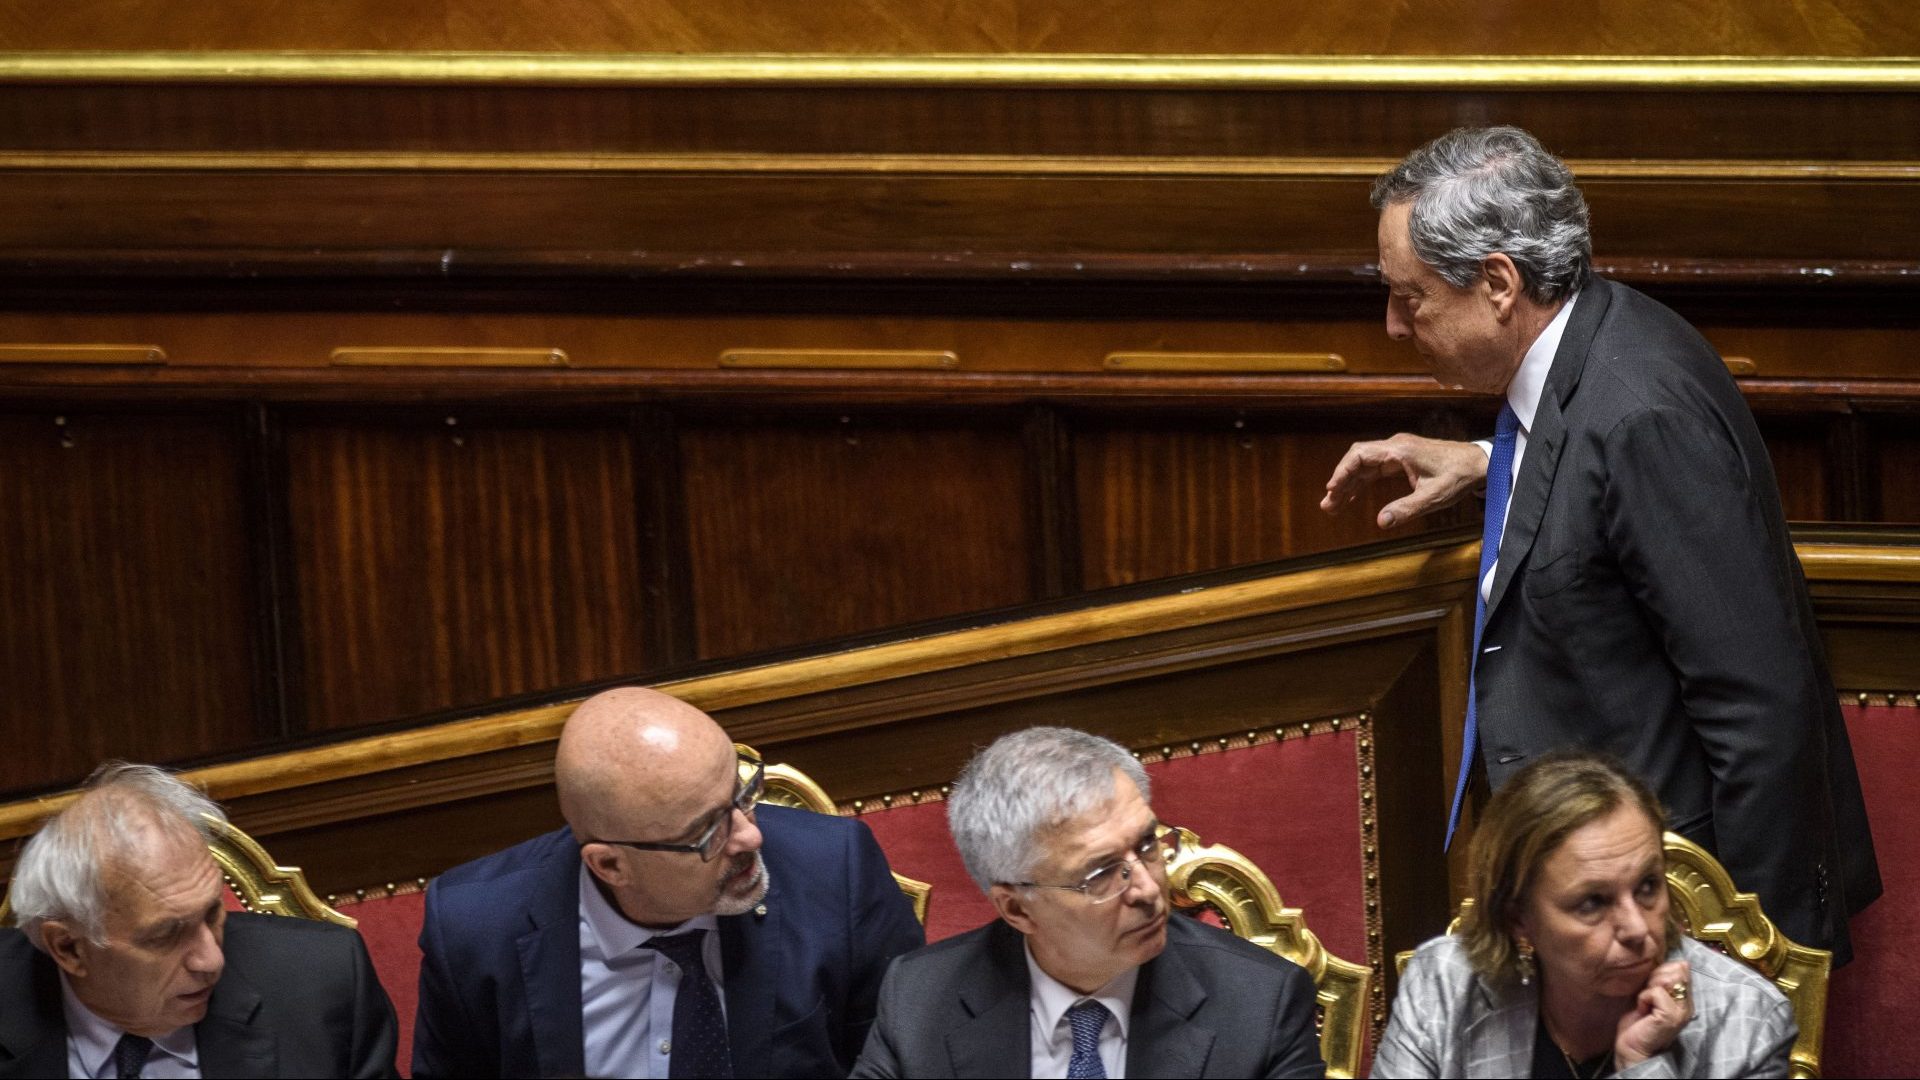 Italian prime minister Mario Draghi takes a break during the debate following his communications to the Italian Senate (Photo by Antonio Masiello/Getty Images)